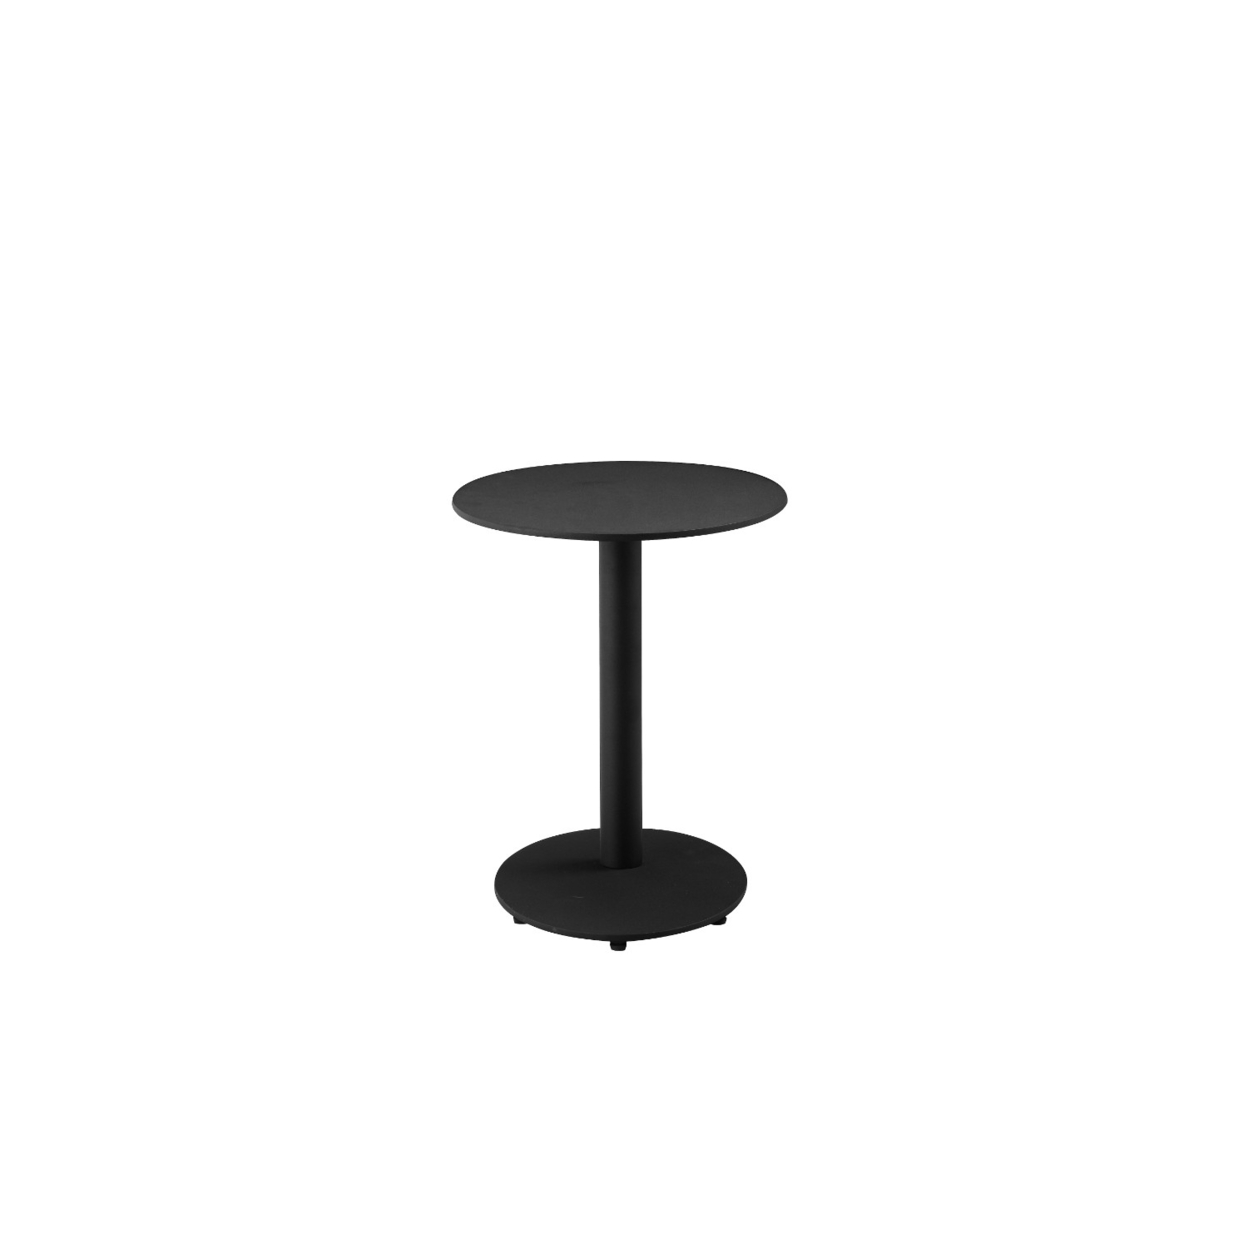 Modern Metal Outdoor Side Table With Oval Top and Base, Black- Saltoro Sherpi - image 3 of 3